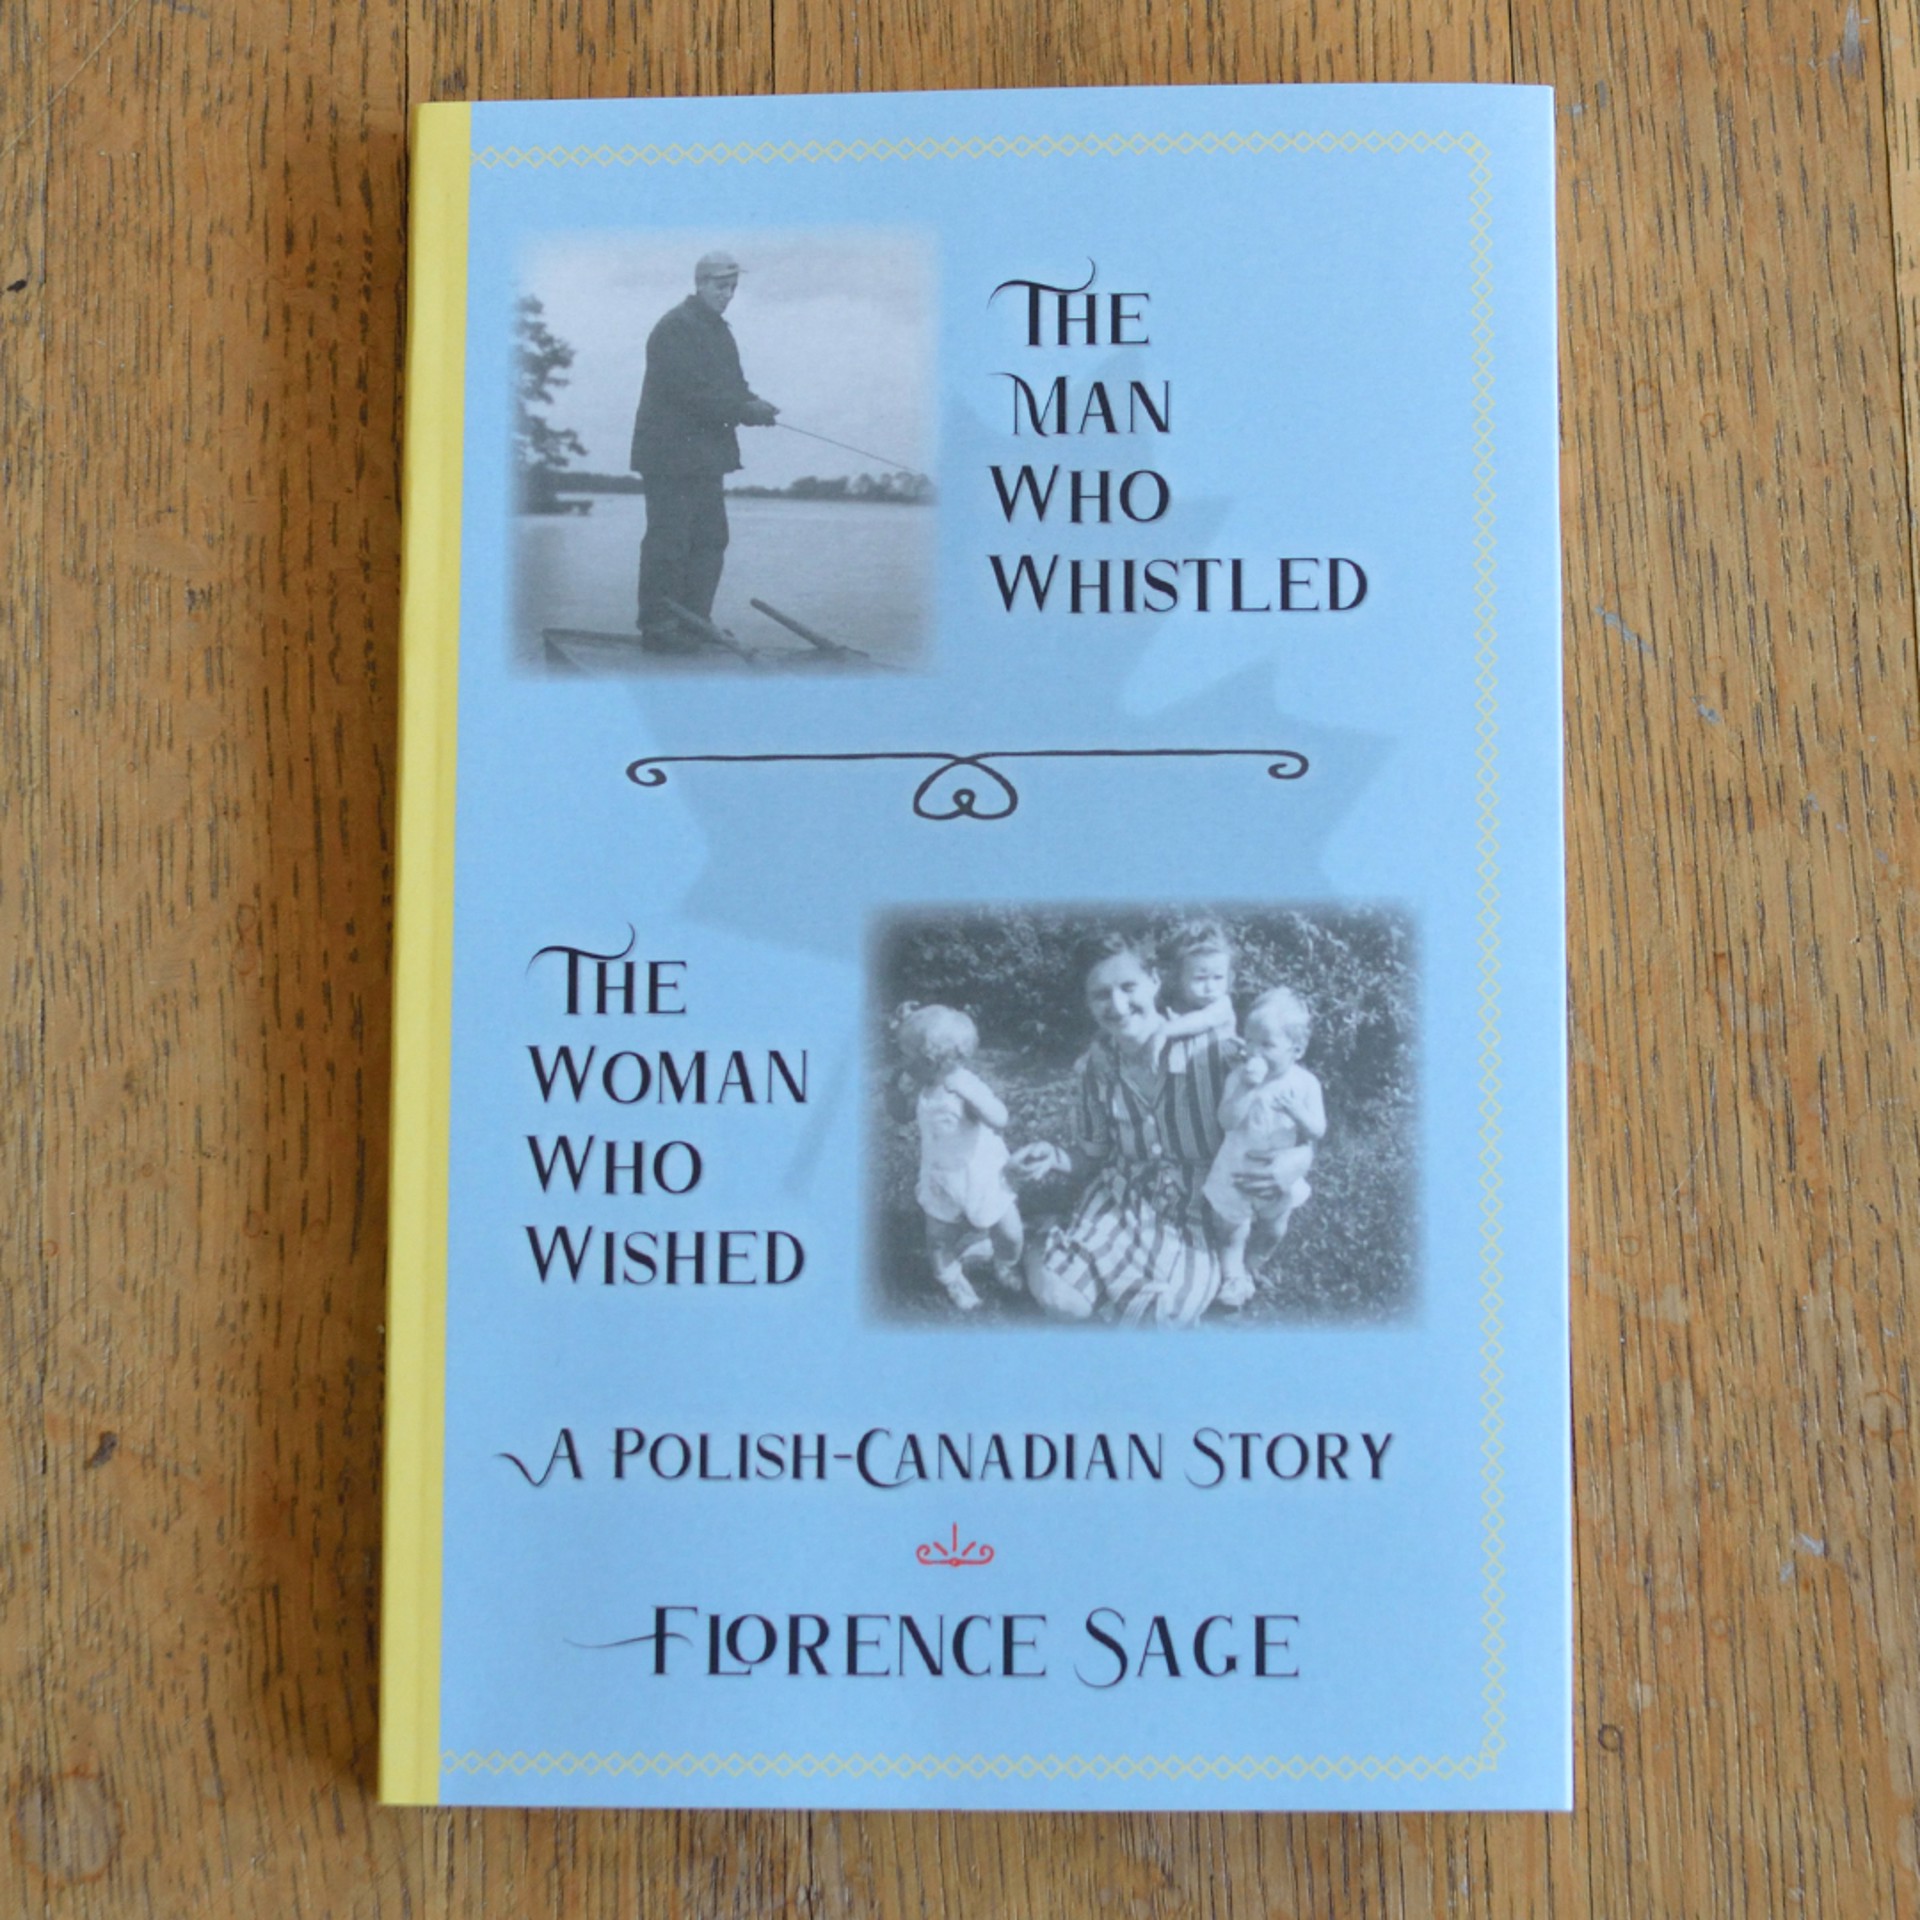 The Man Who Whistled, The Woman Who Wished by Florence Sage